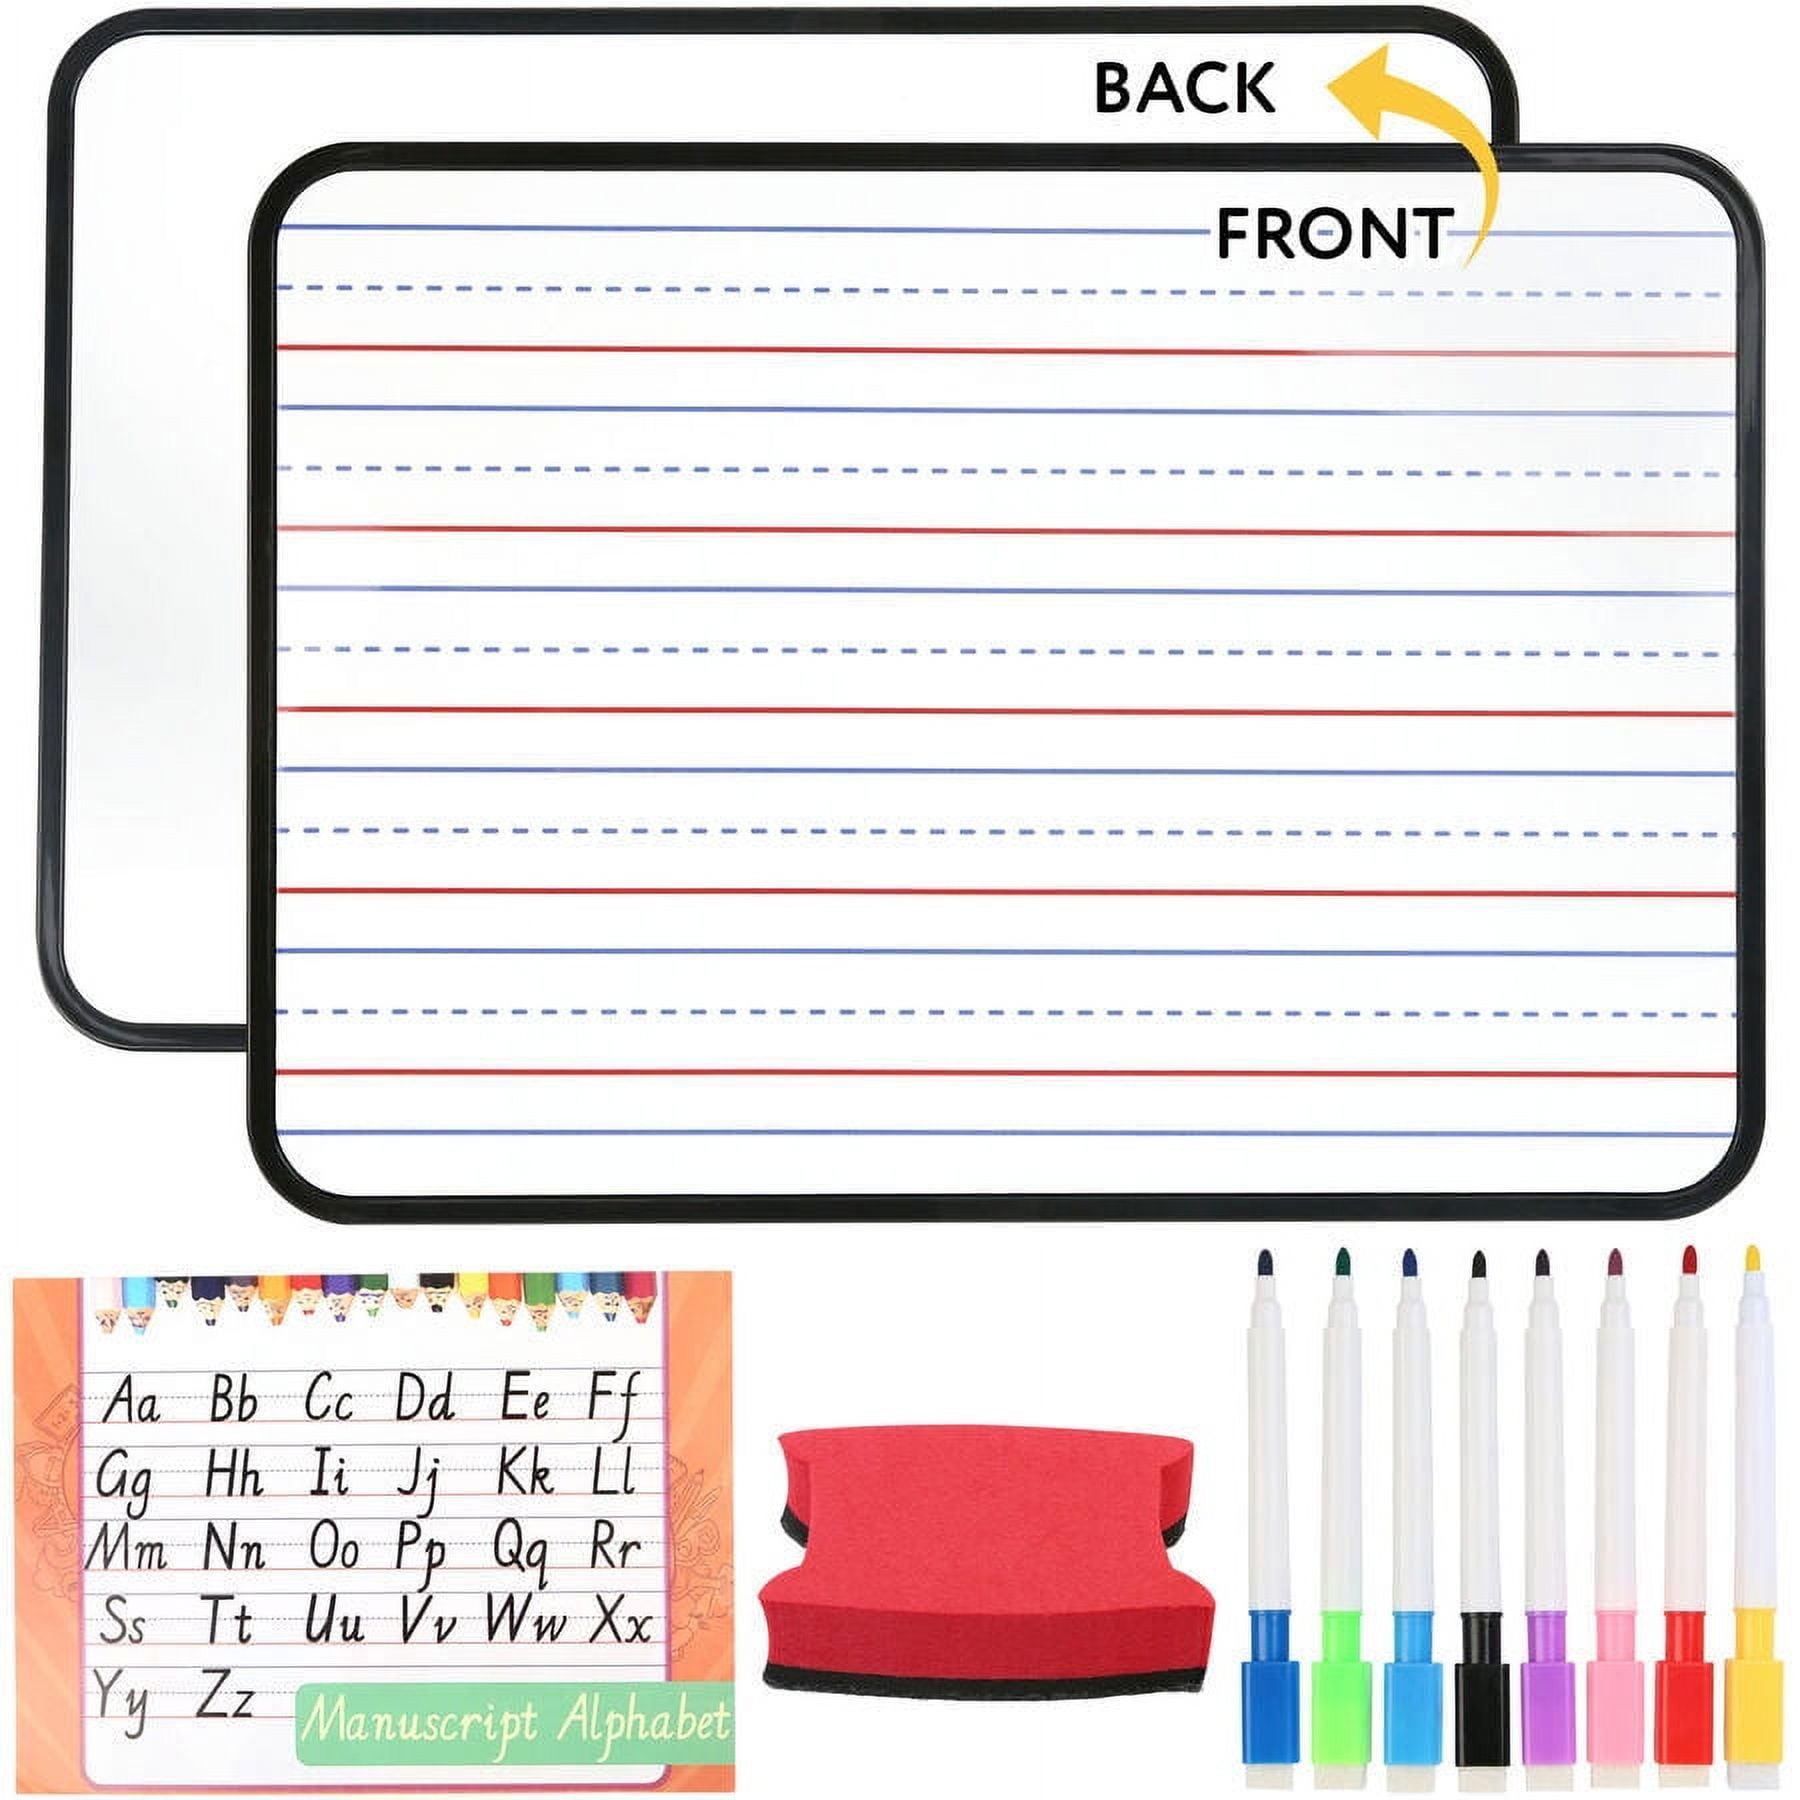 Blank Whiteboard Sheets Used For Teaching Recording And Reminding Presentation  Supplies Dry Erasable Paper Plain With Pen - Whiteboard - AliExpress